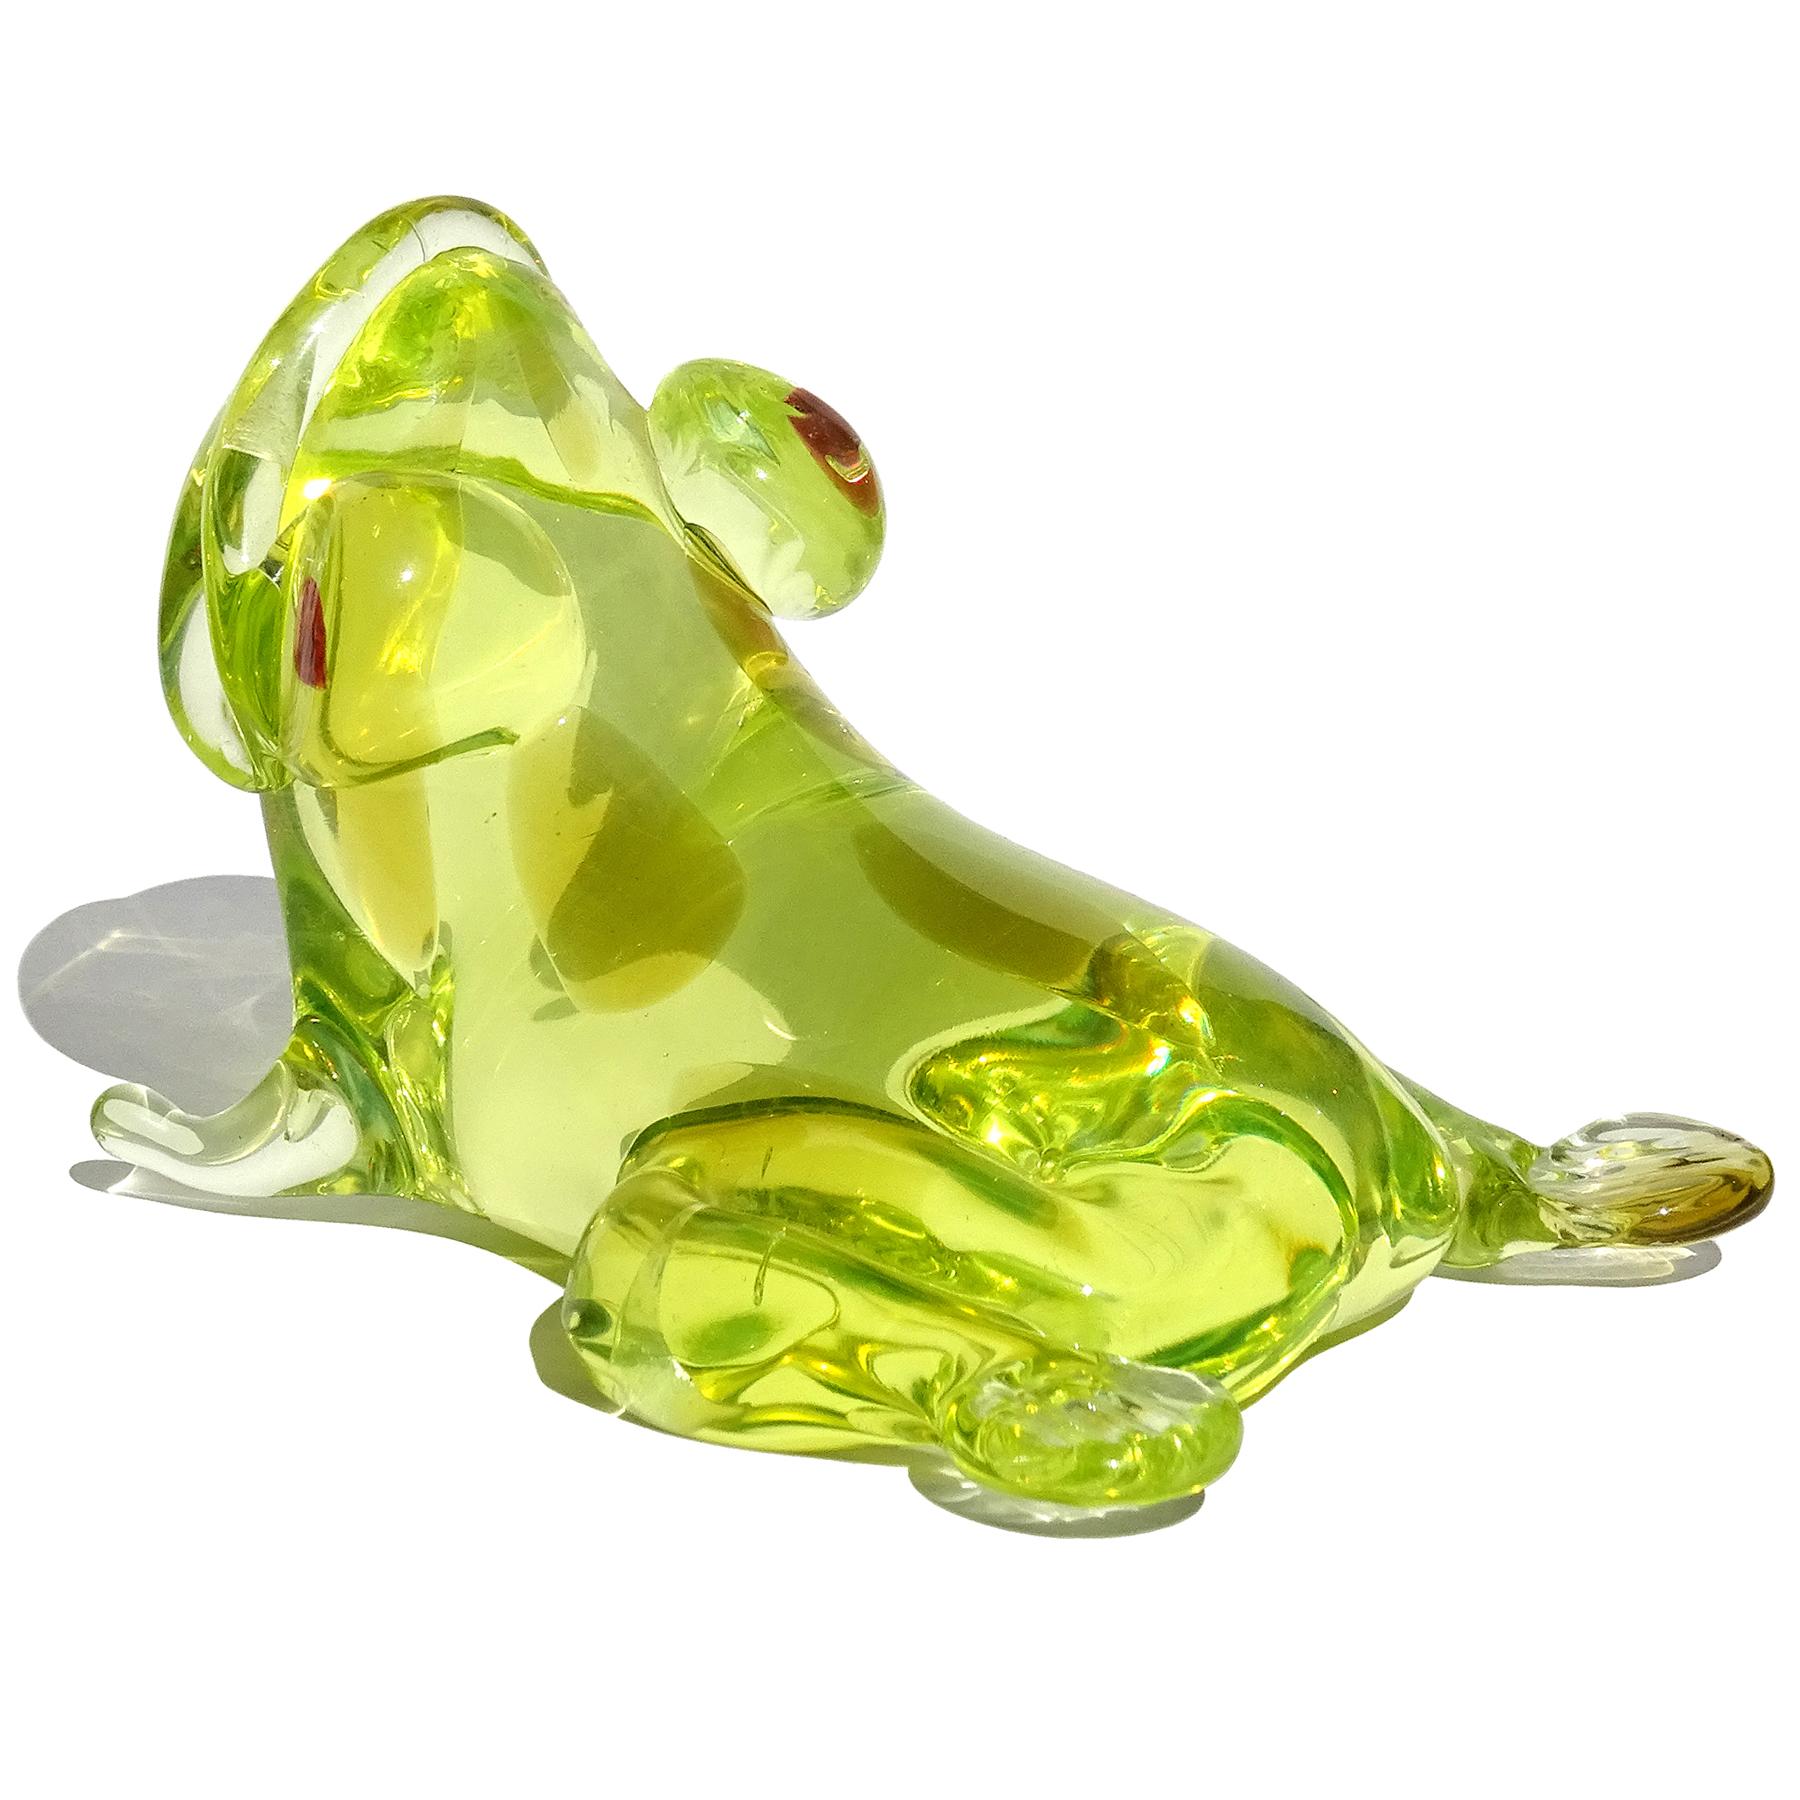 Beautiful vintage Murano hand blown glowing green with olive spots Italian art glass frog sculpture, paperweight. or figurine. Created in the manner of the Salviati company. The piece glows bright neon green under a black light from the high amount